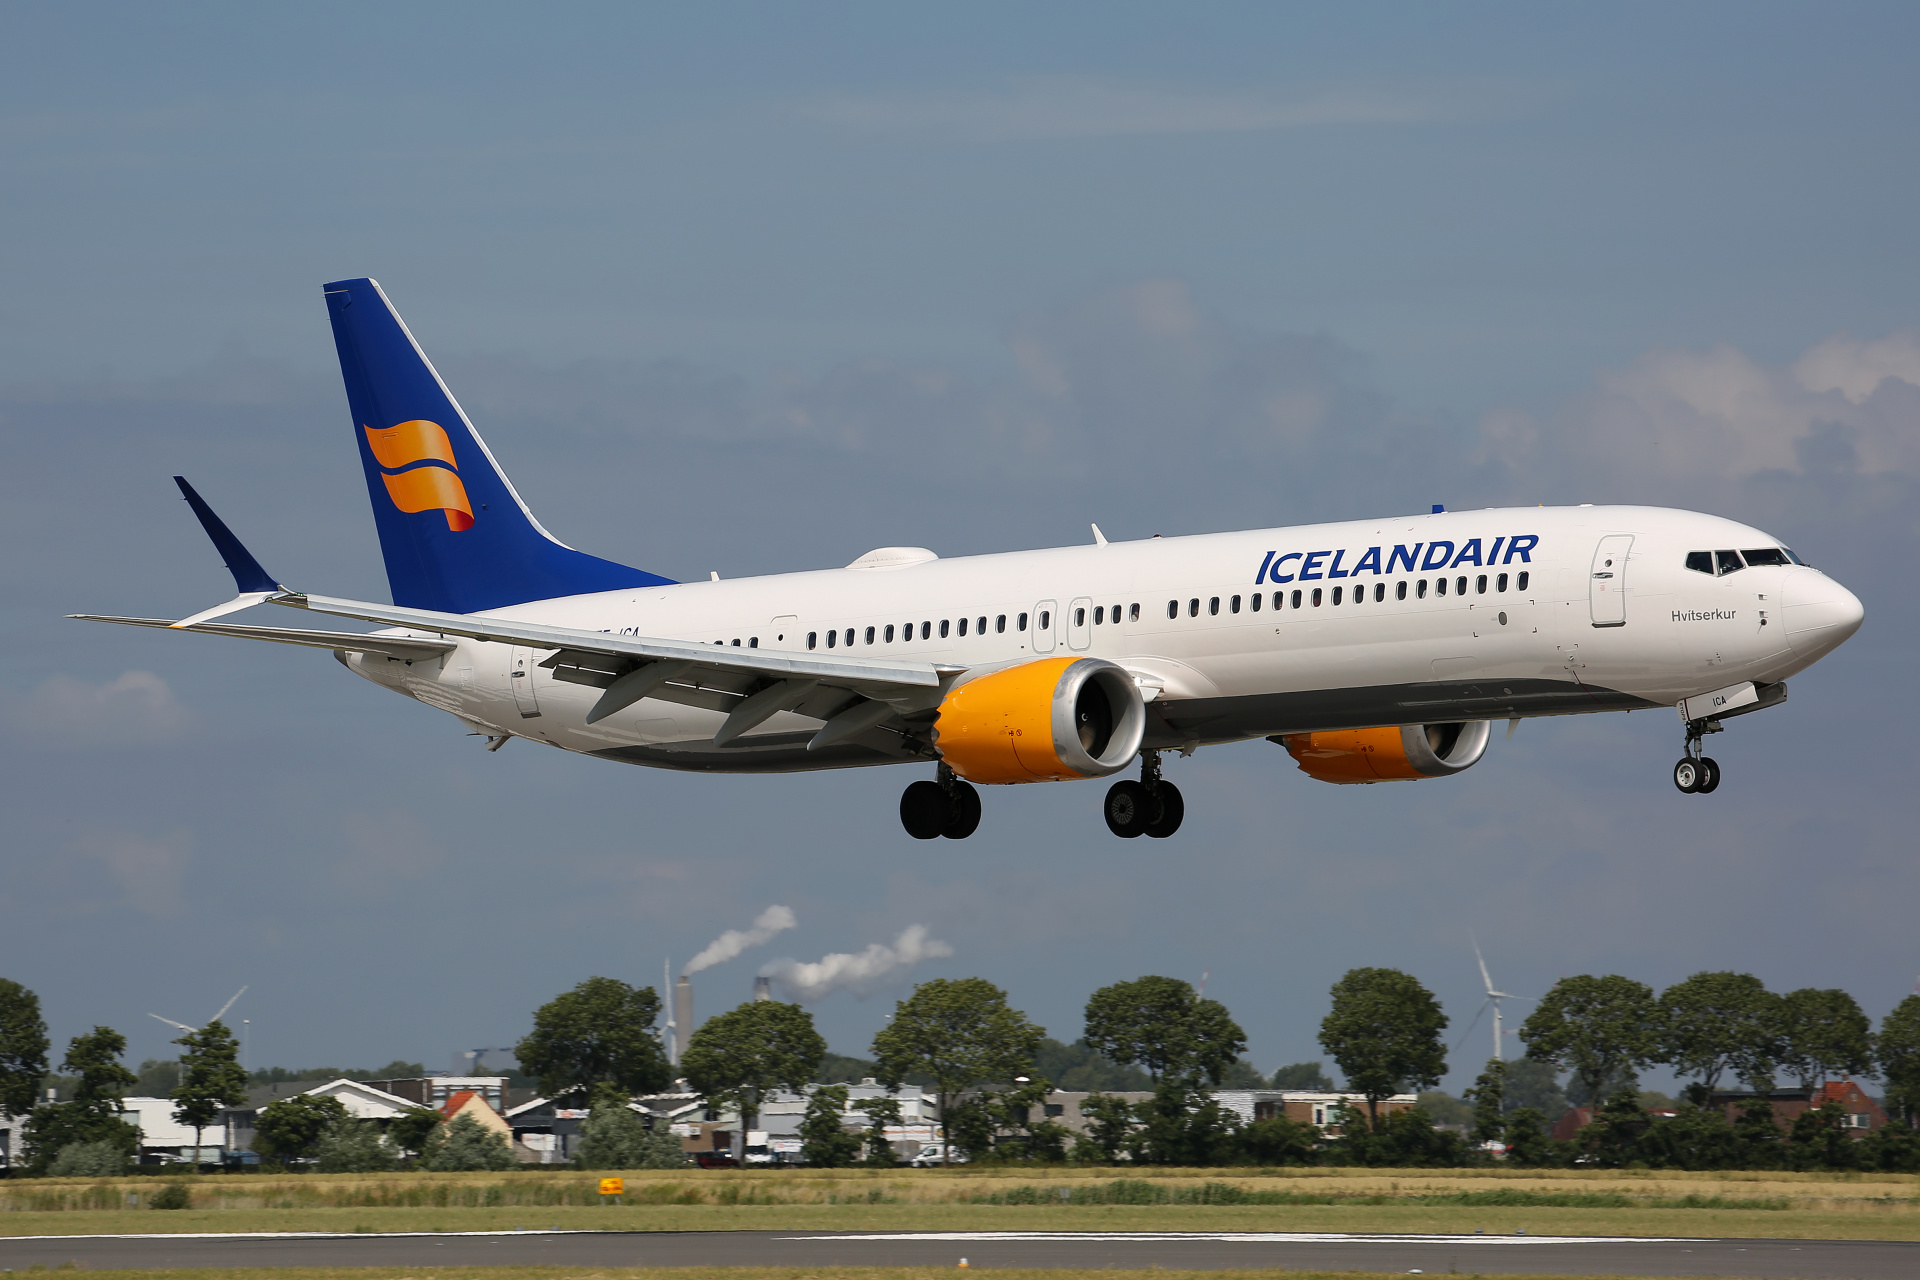 Boeing 737-9 MAX, TF-ICA, Icelandair (Aircraft » Schiphol Spotting » various)